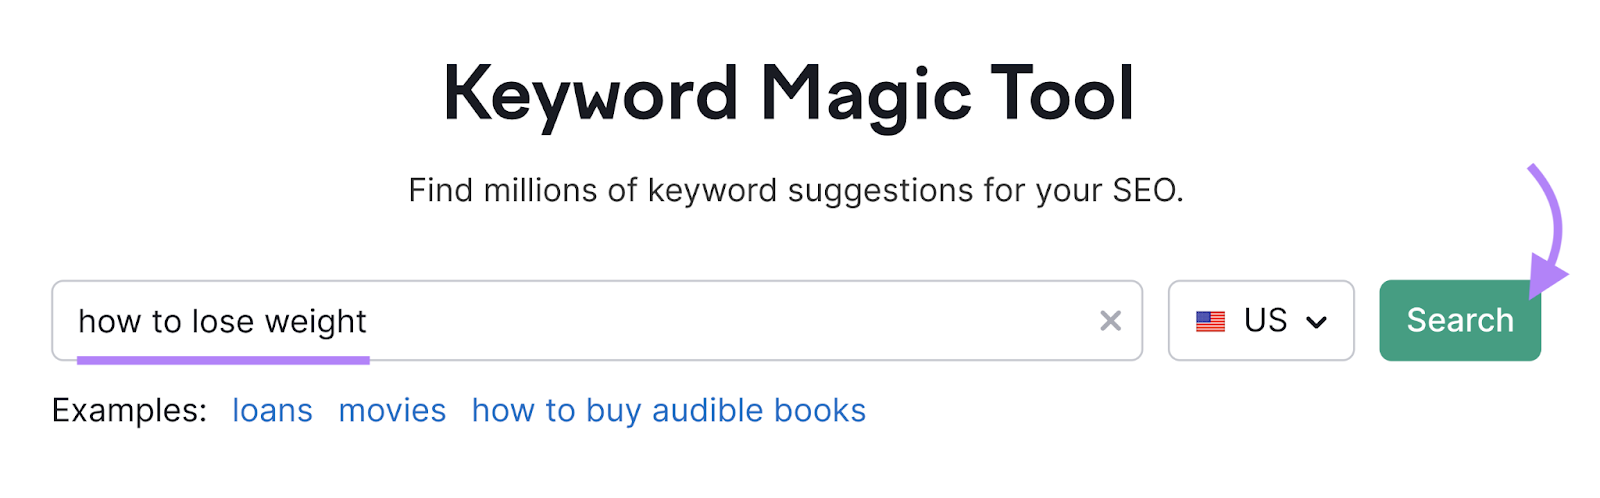 Keyword Magic Tool hunt  for "how to suffer  weight"